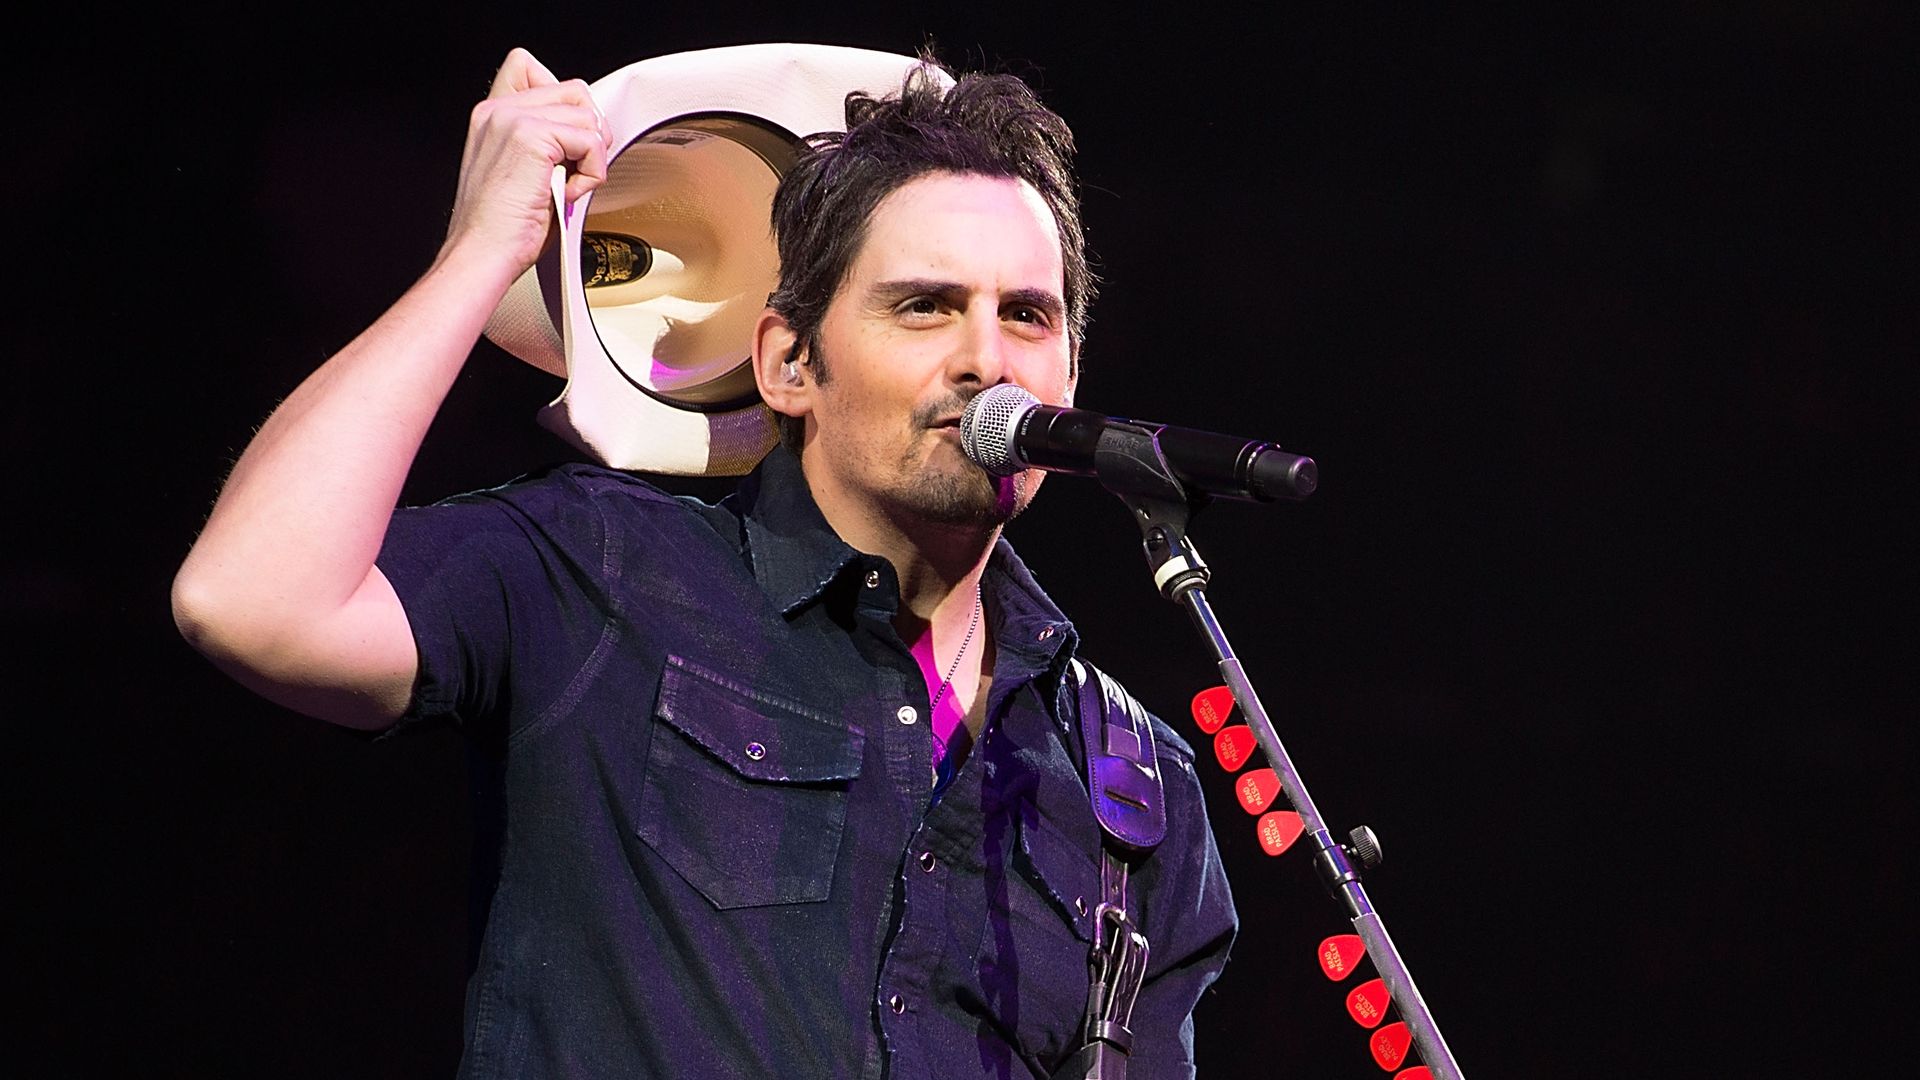 Singer songwriter Brad Paisley, wearing a black short sleeve button-up shirt, removes his cowboy hat as he sings into a microphone 